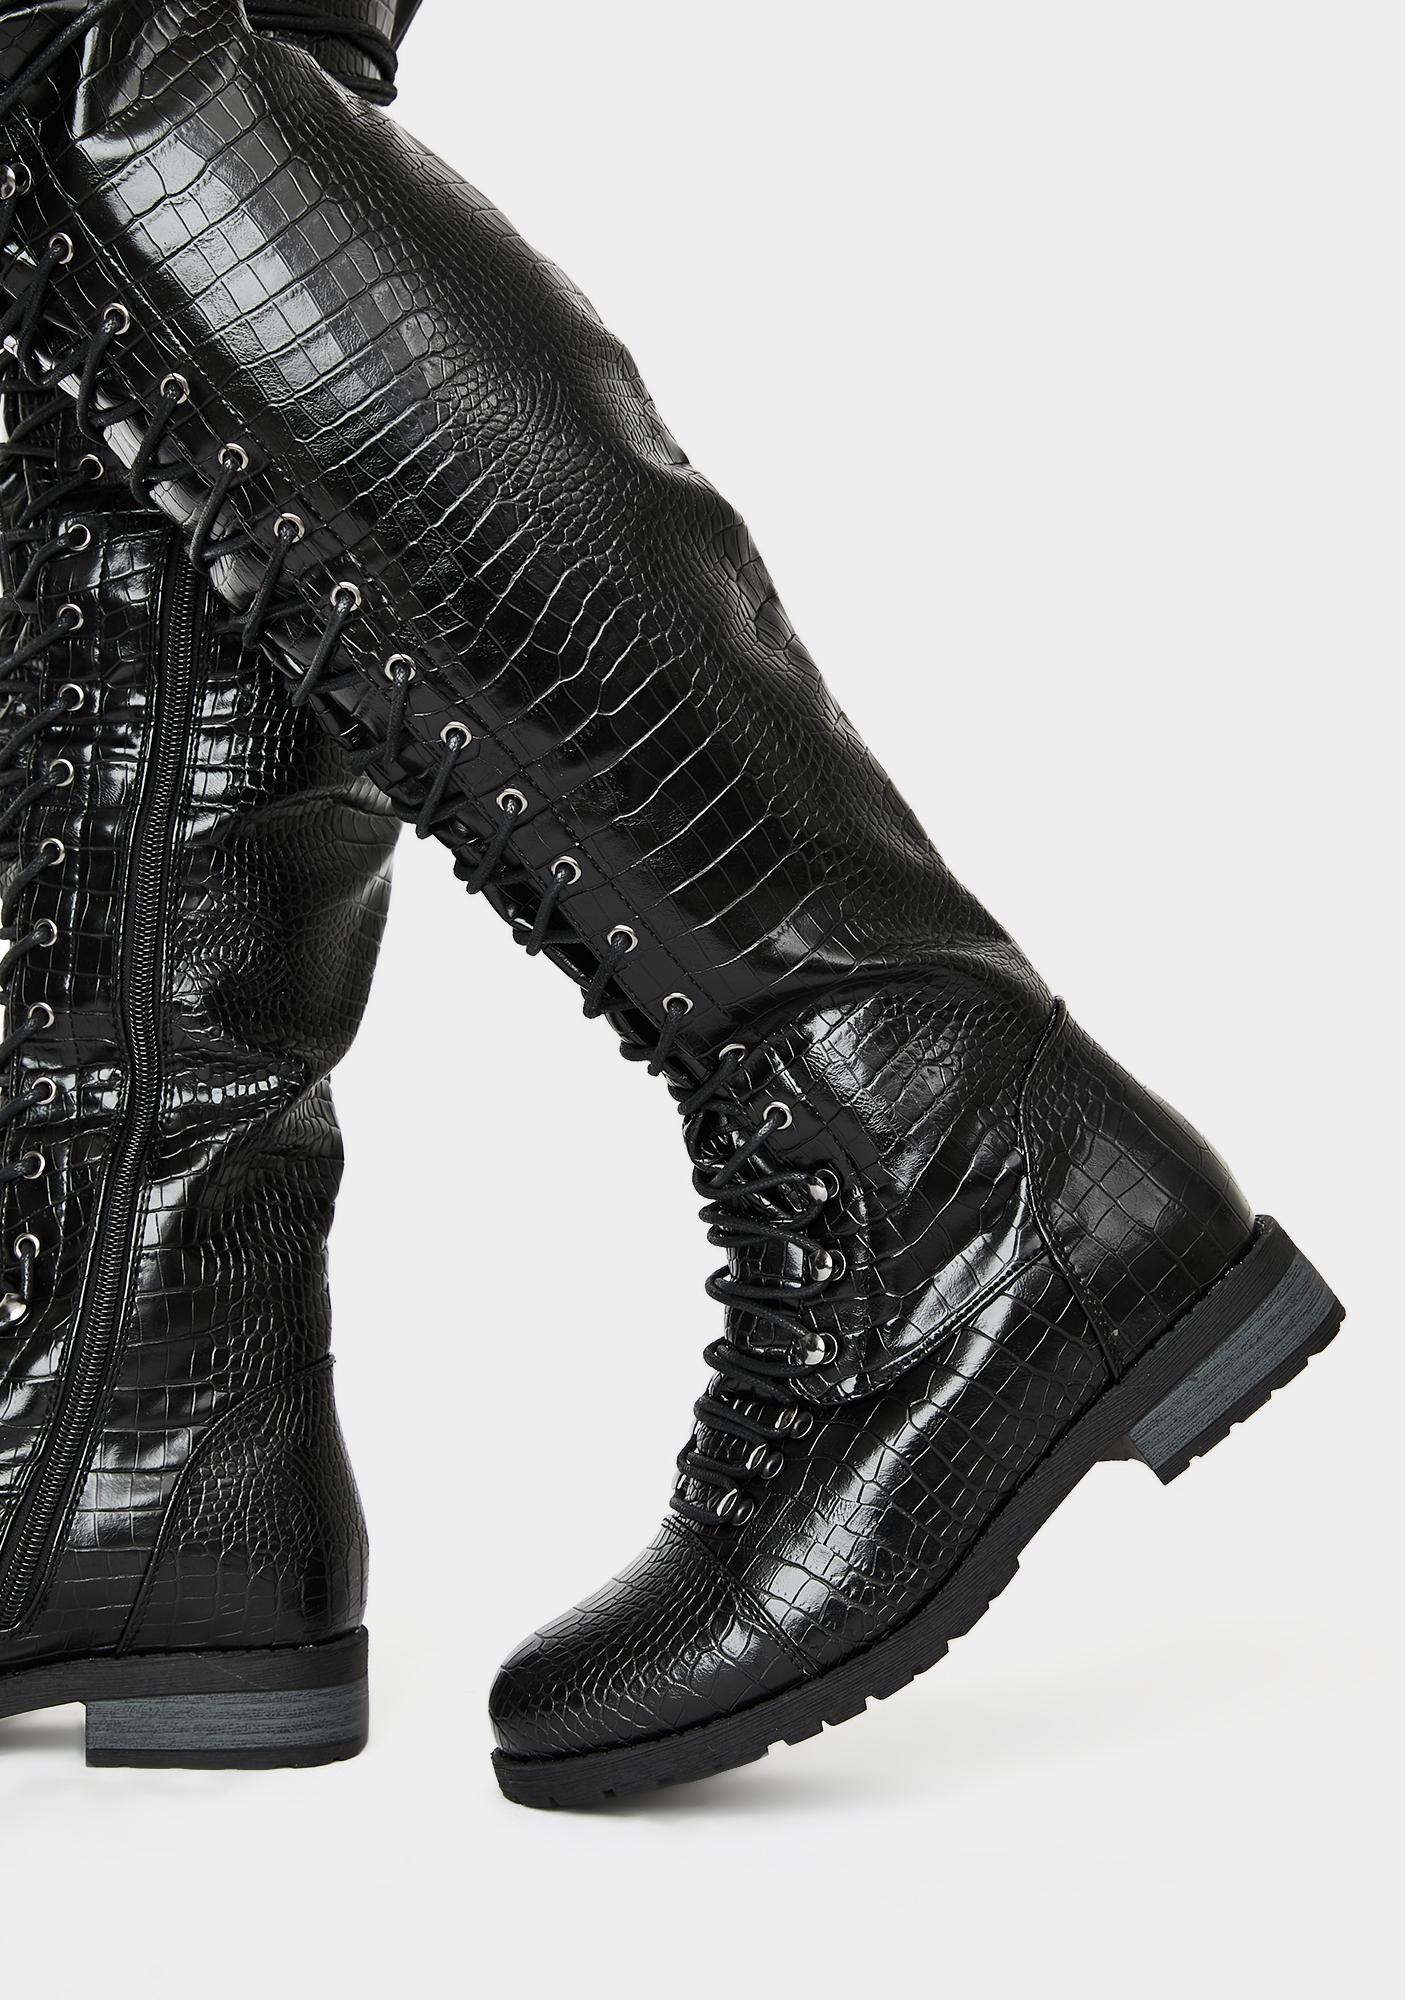 croc style boots